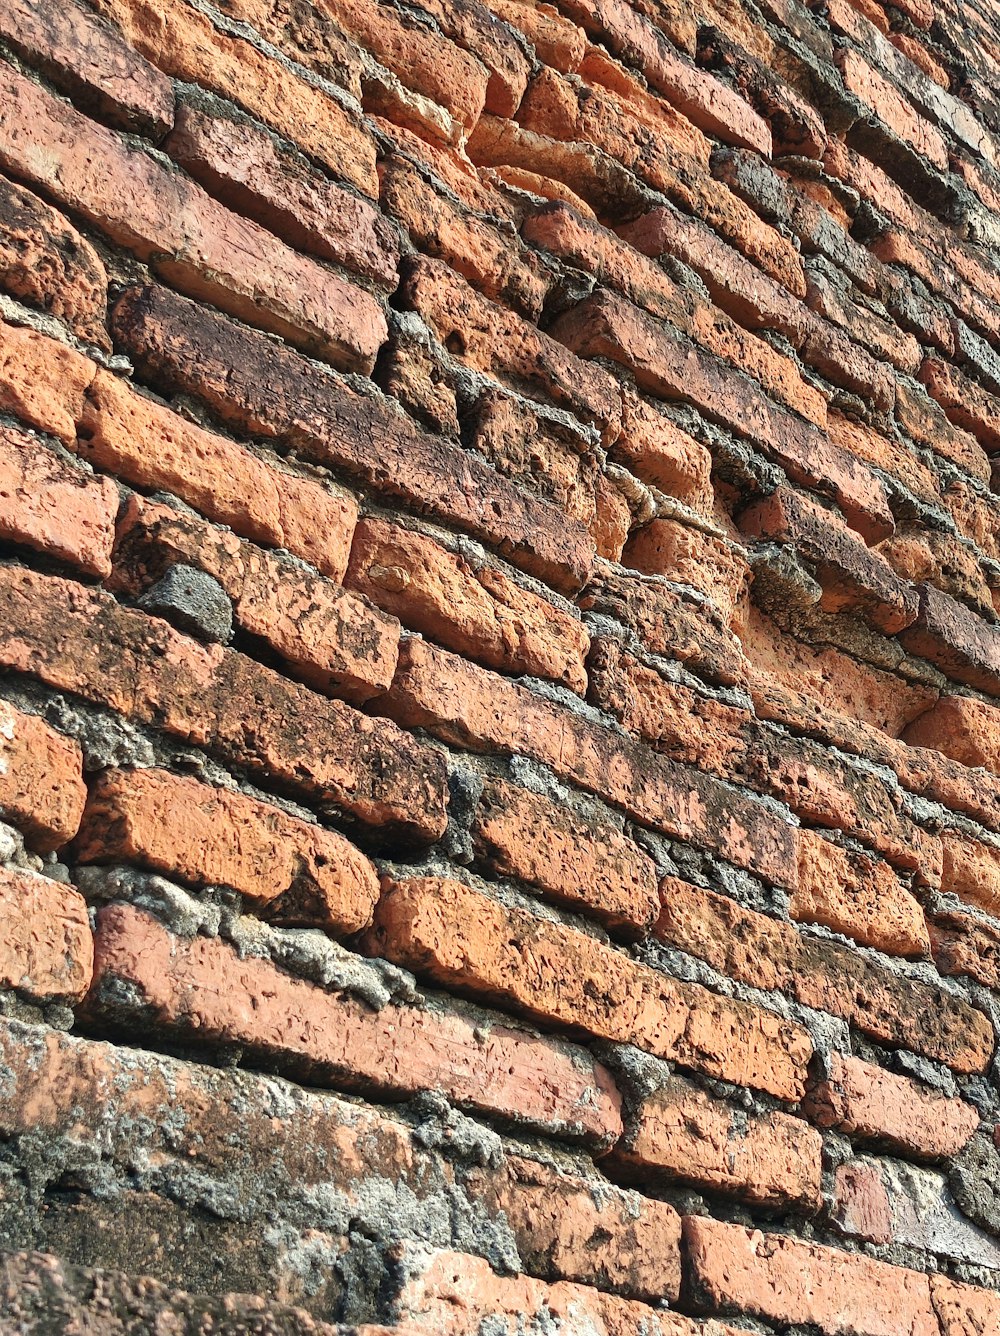 a close up of a brick wall with a clock on it